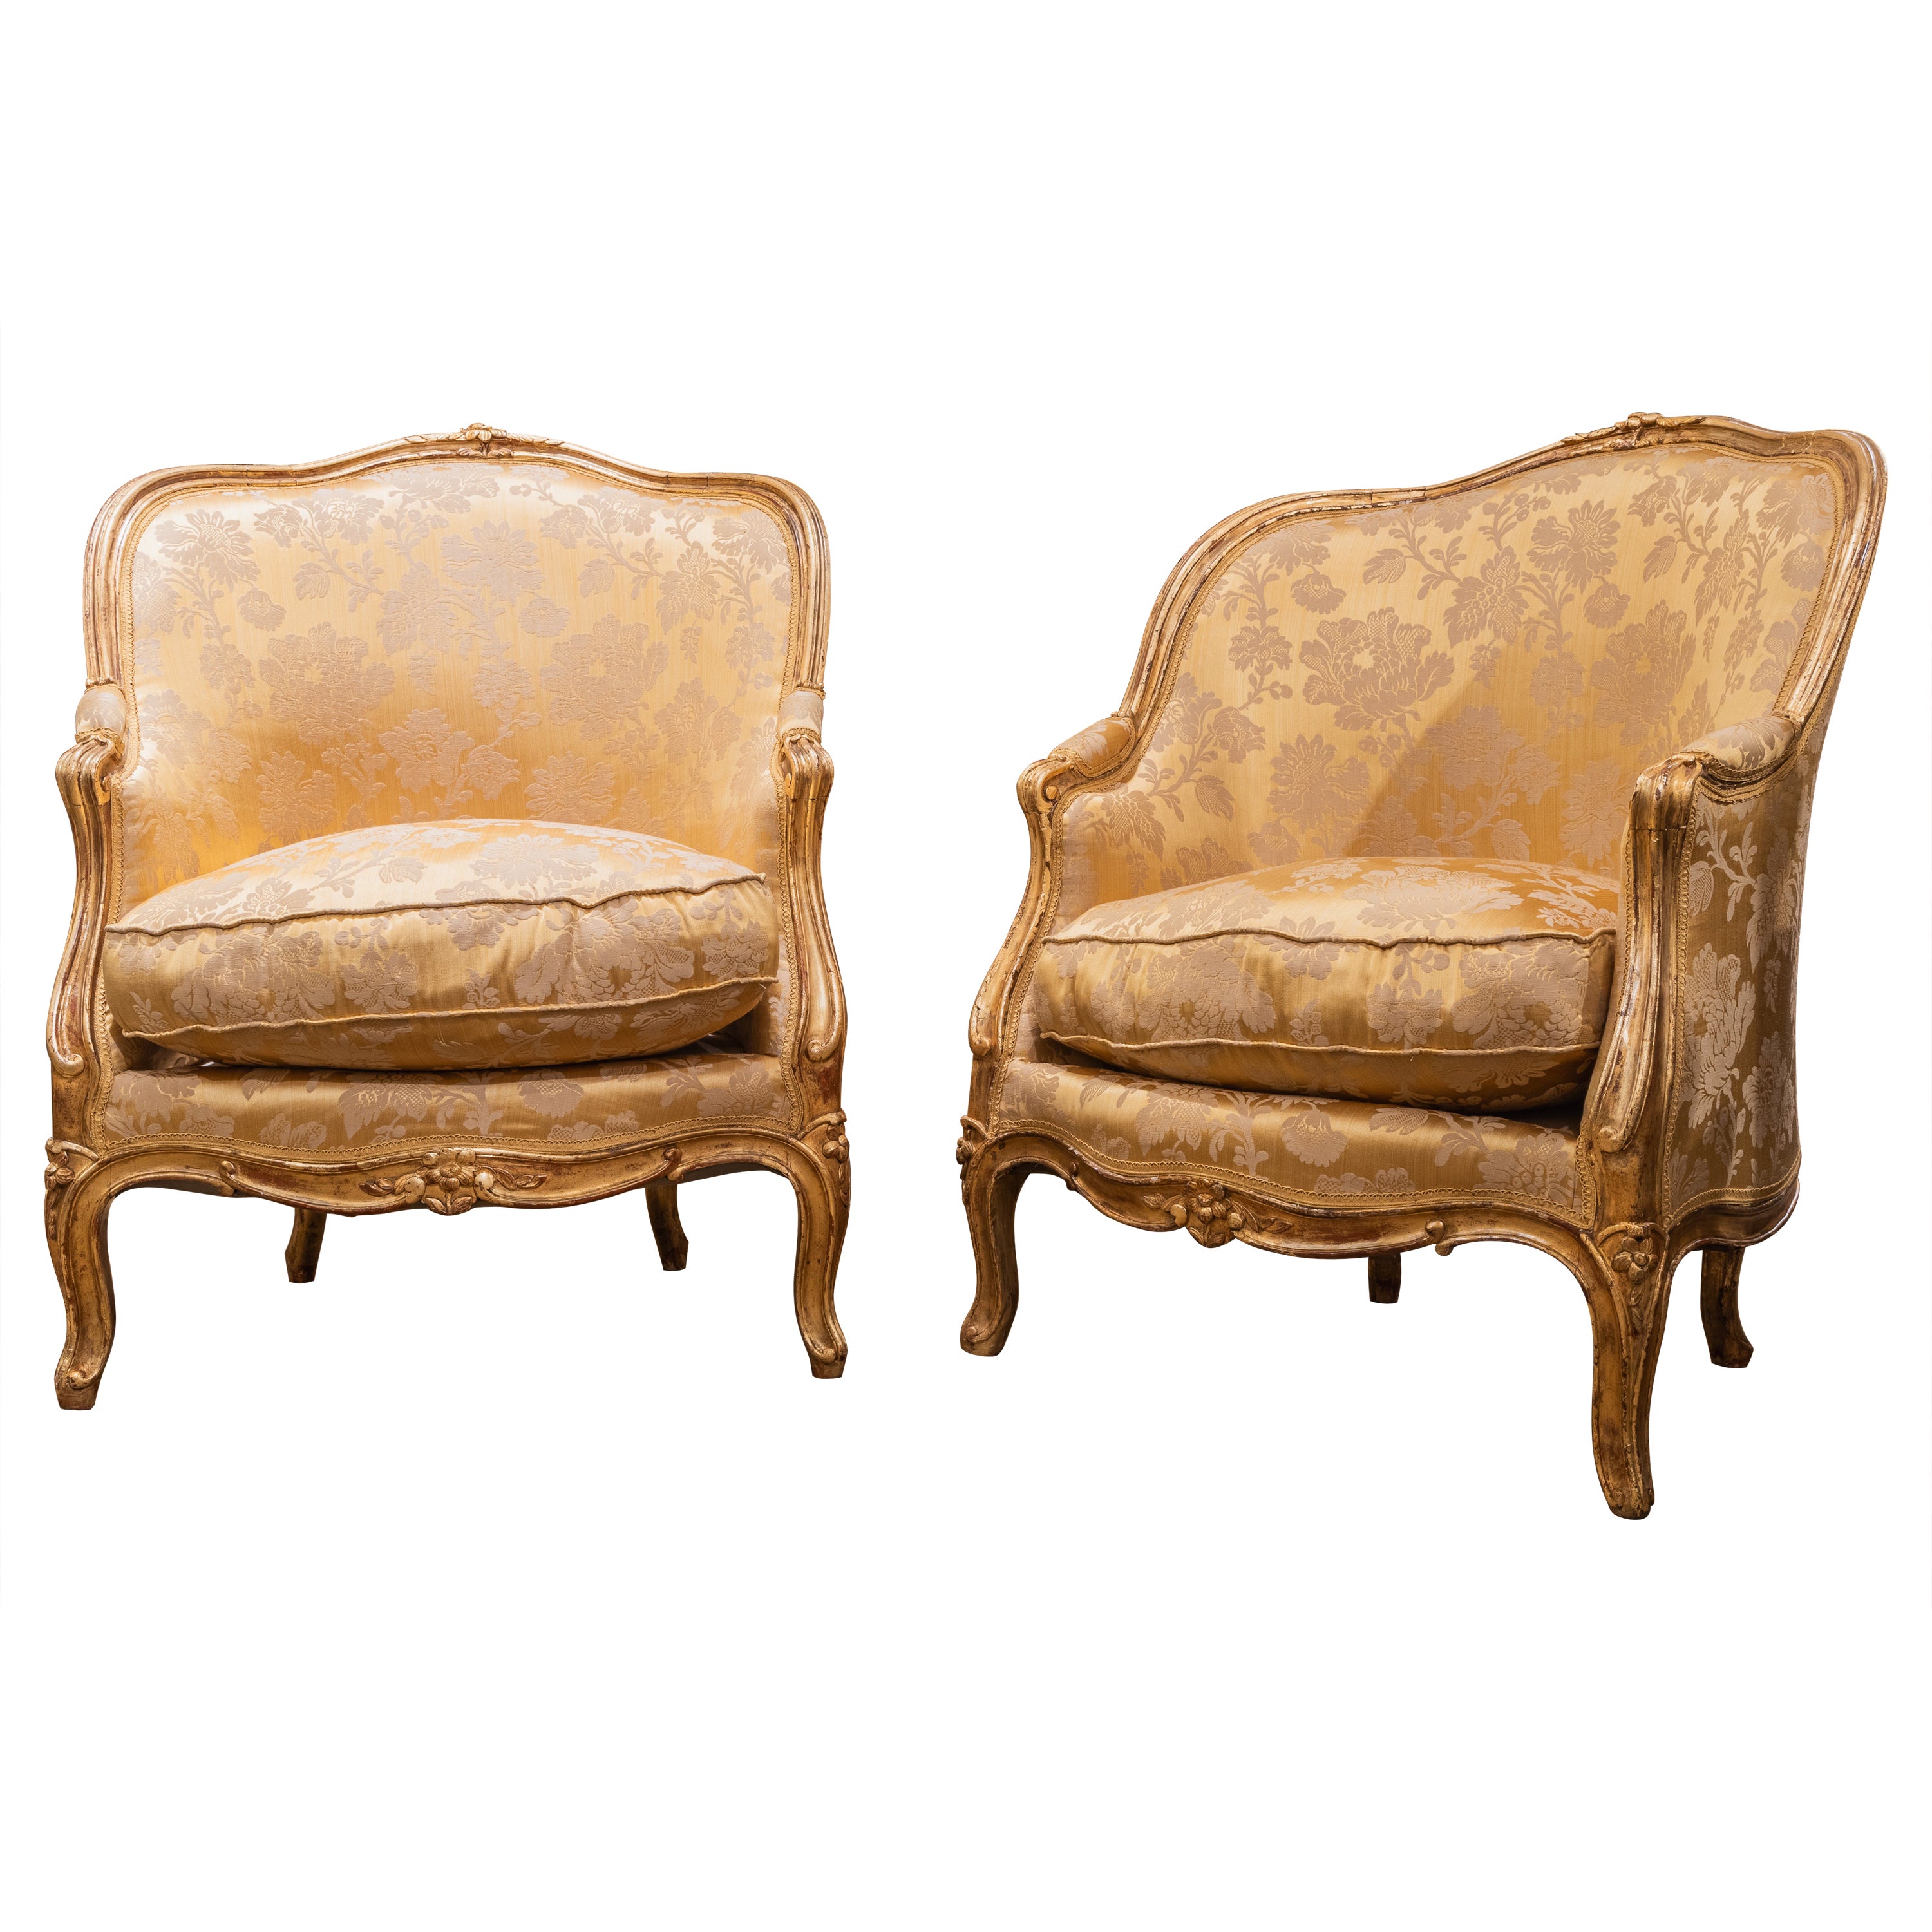 A fine pair of 19th century Louis XV water gilt and carved bergeres